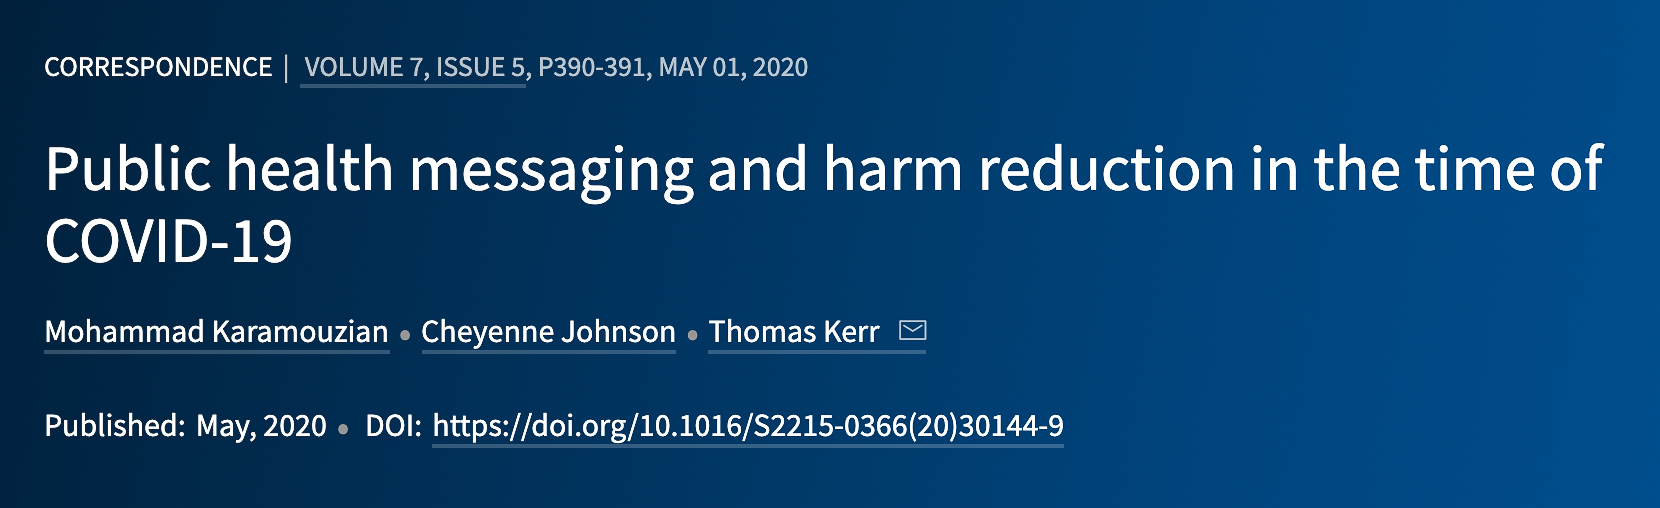 Public-health-messaging-and-harm-reduction-in-the-time-of-COVID-19